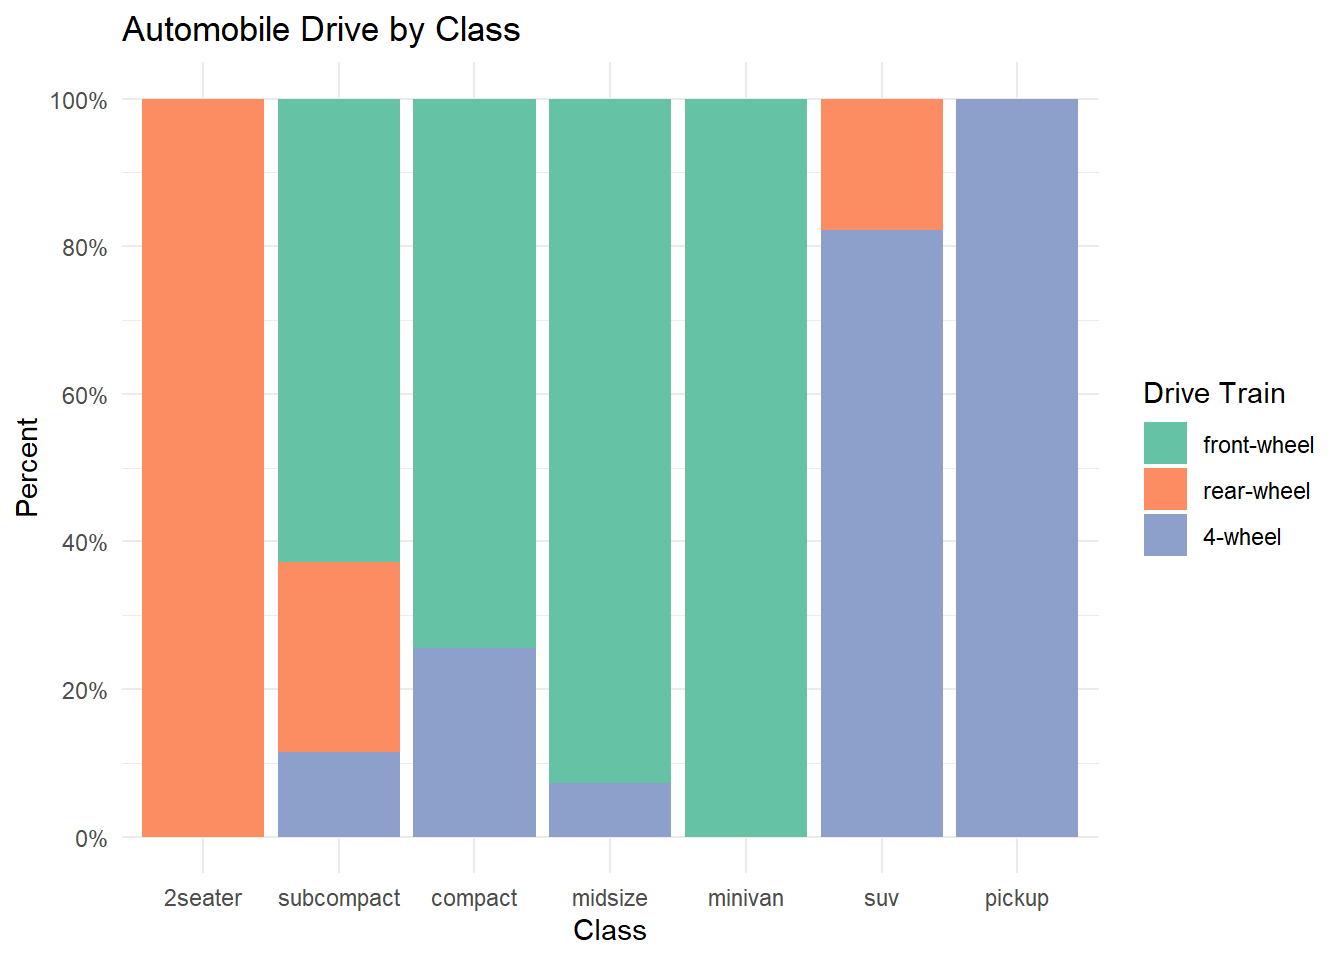 Segmented bar chart with improved labeling and color